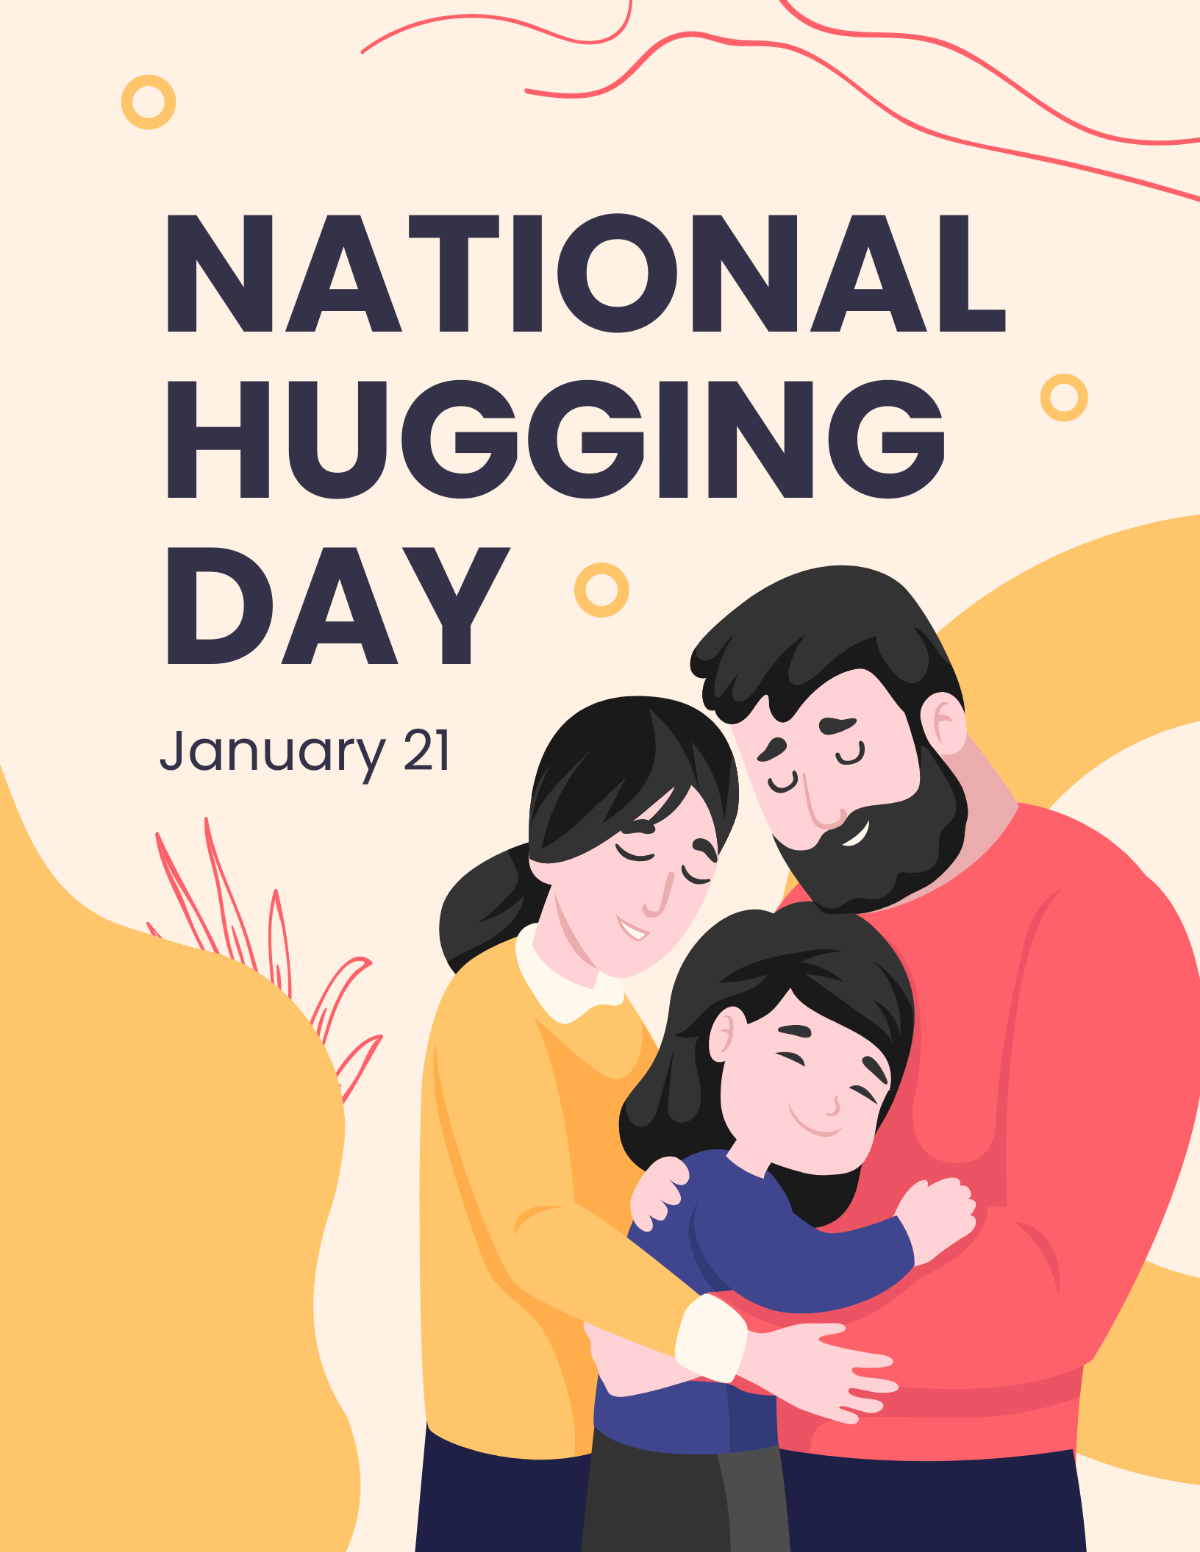 Free National Hugging Day Flyer Template